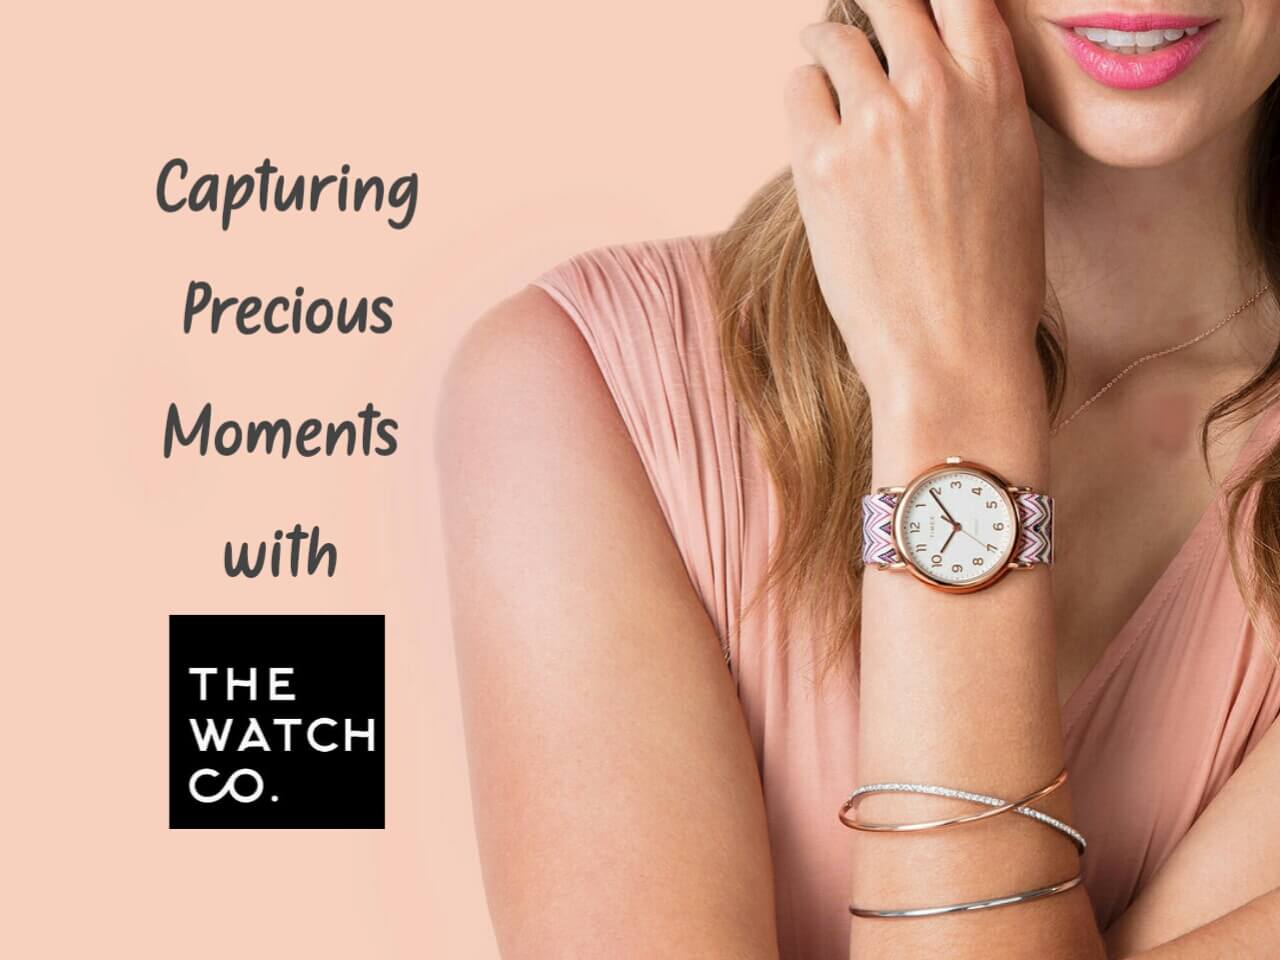 Capturing Precious Moments with THE WATCH Co